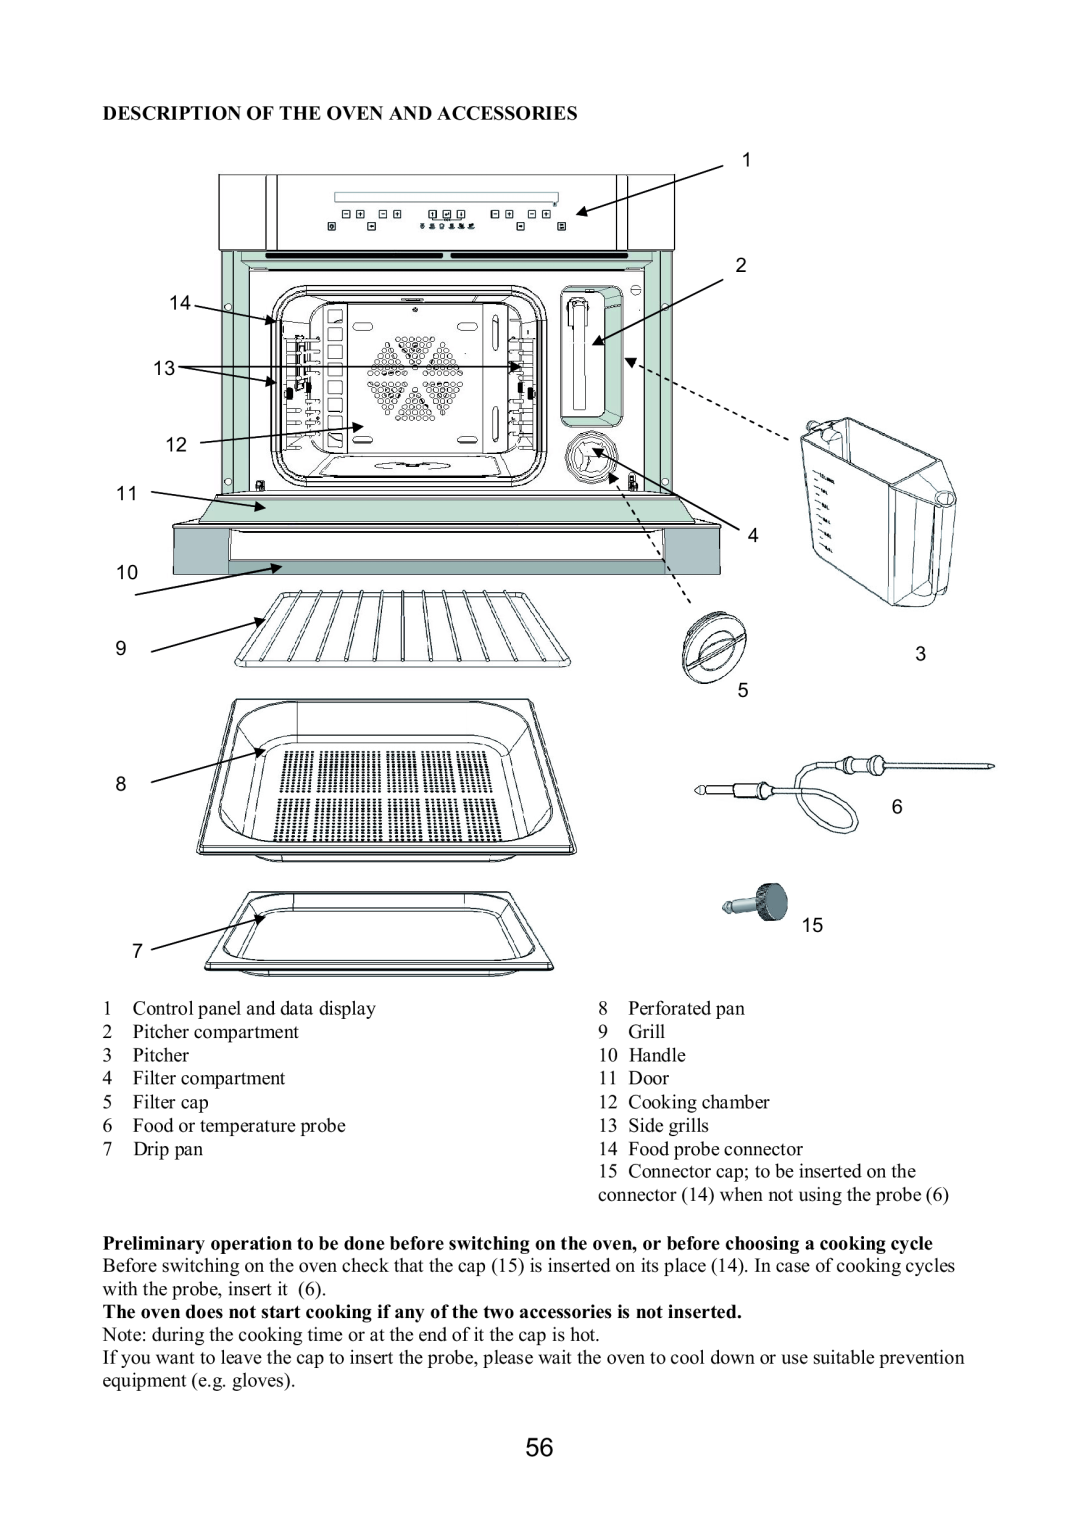 Foster S4000 user manual Description Of The Oven And Accessories 